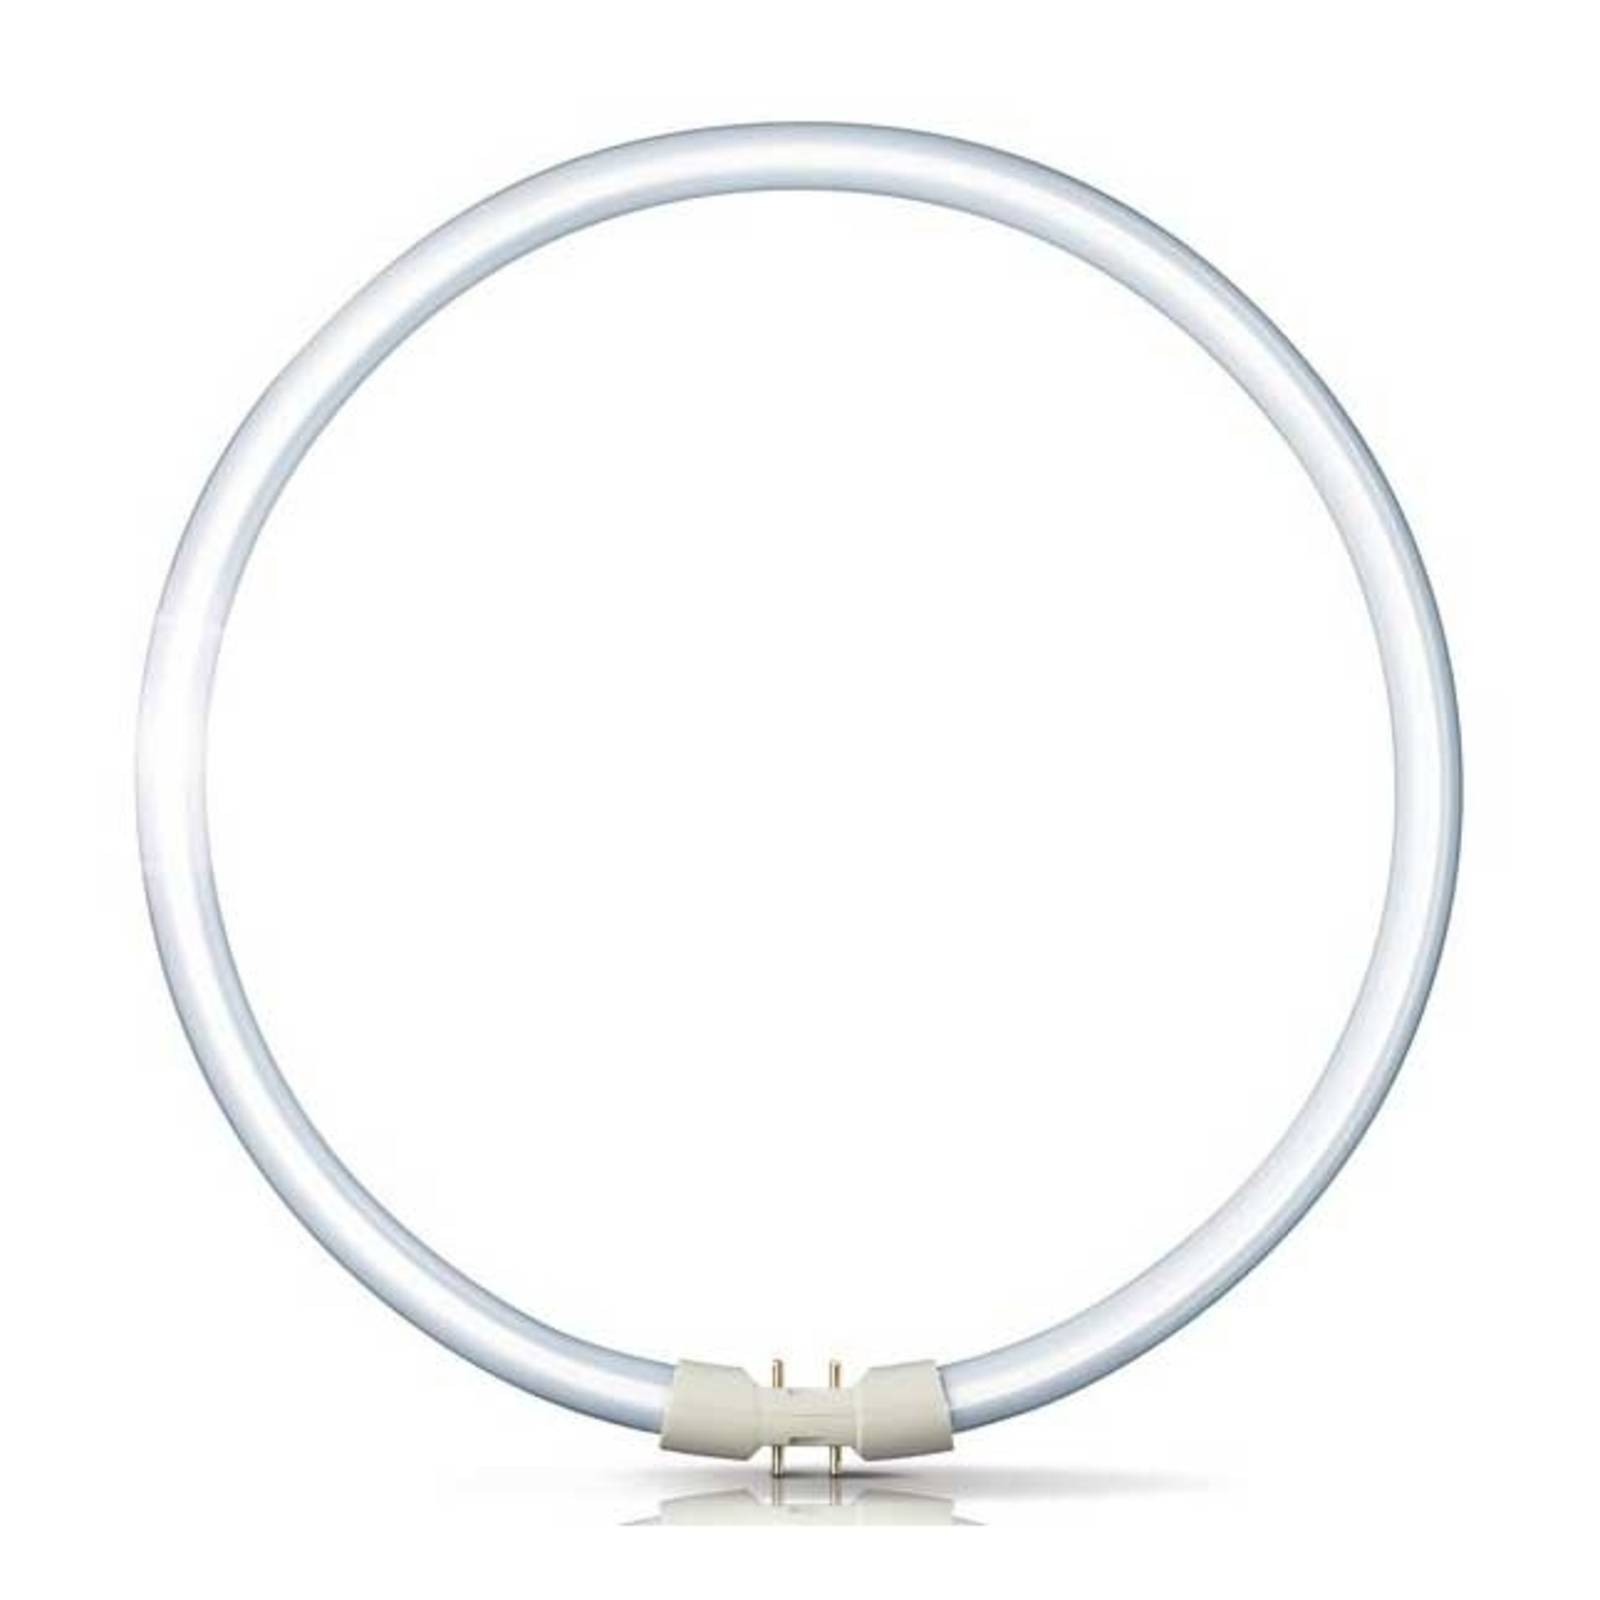 Philips 2GX13 60W 840 Ring-Leuchtstofflampe Master TL5